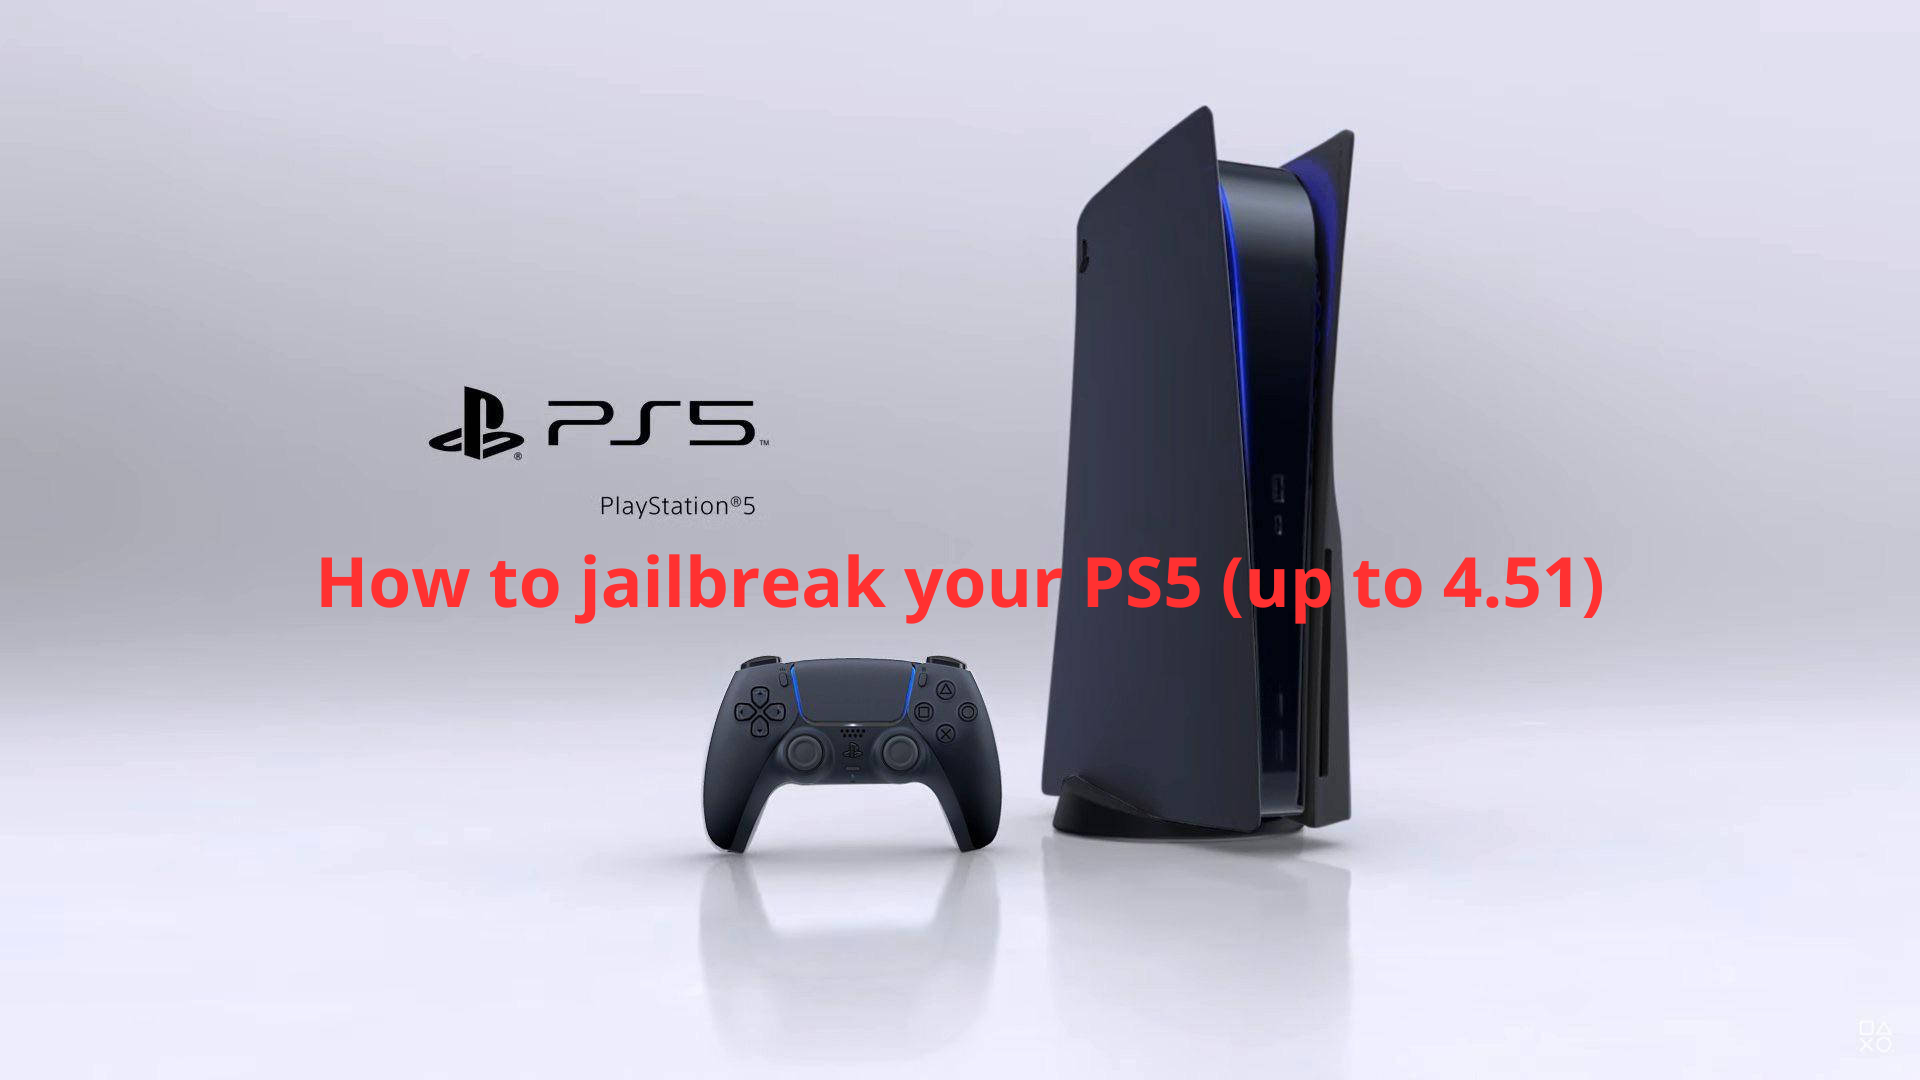 How to jailbreak your PS5 (up to 4.51)